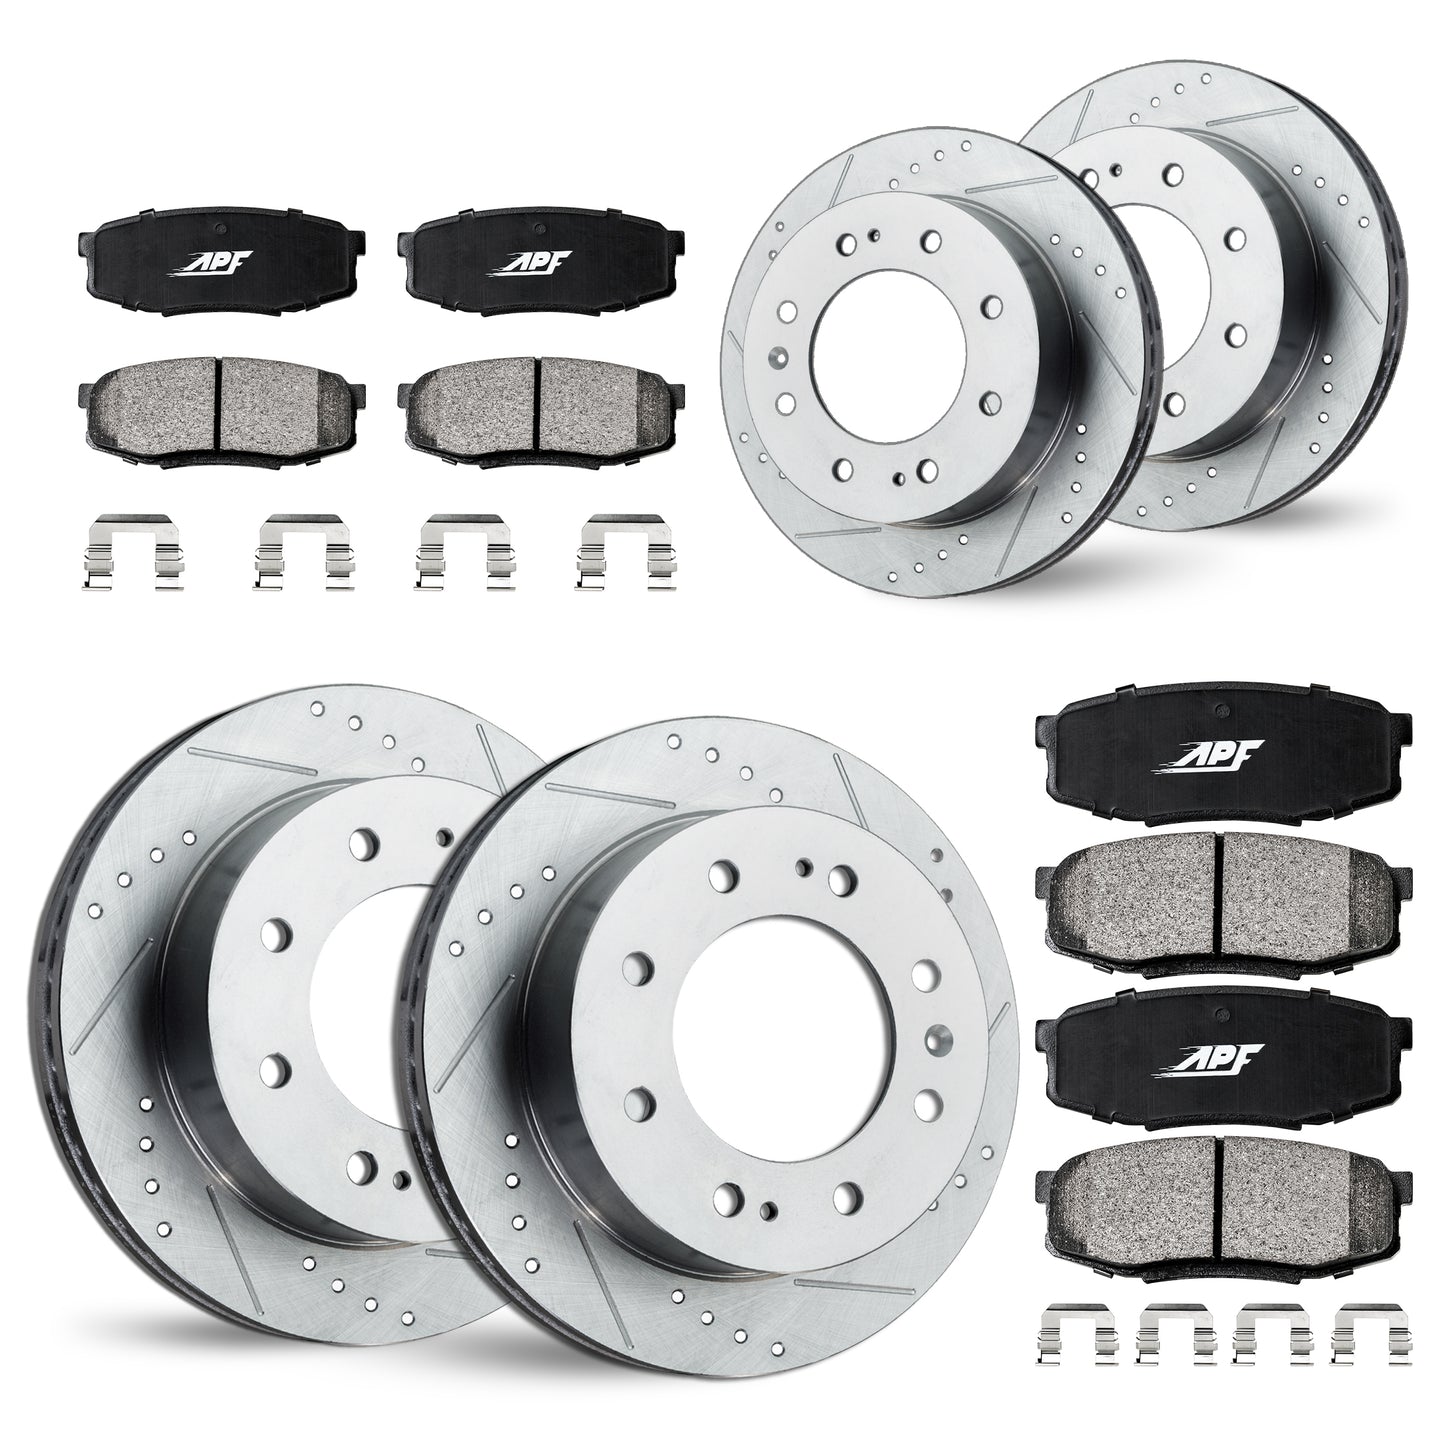 APF Full Kit compatible with Chevrolet Suburban 2500 2003-2005 | Zinc Drilled Slotted Rotors with Ceramic Carbon Fiber Brake Pads